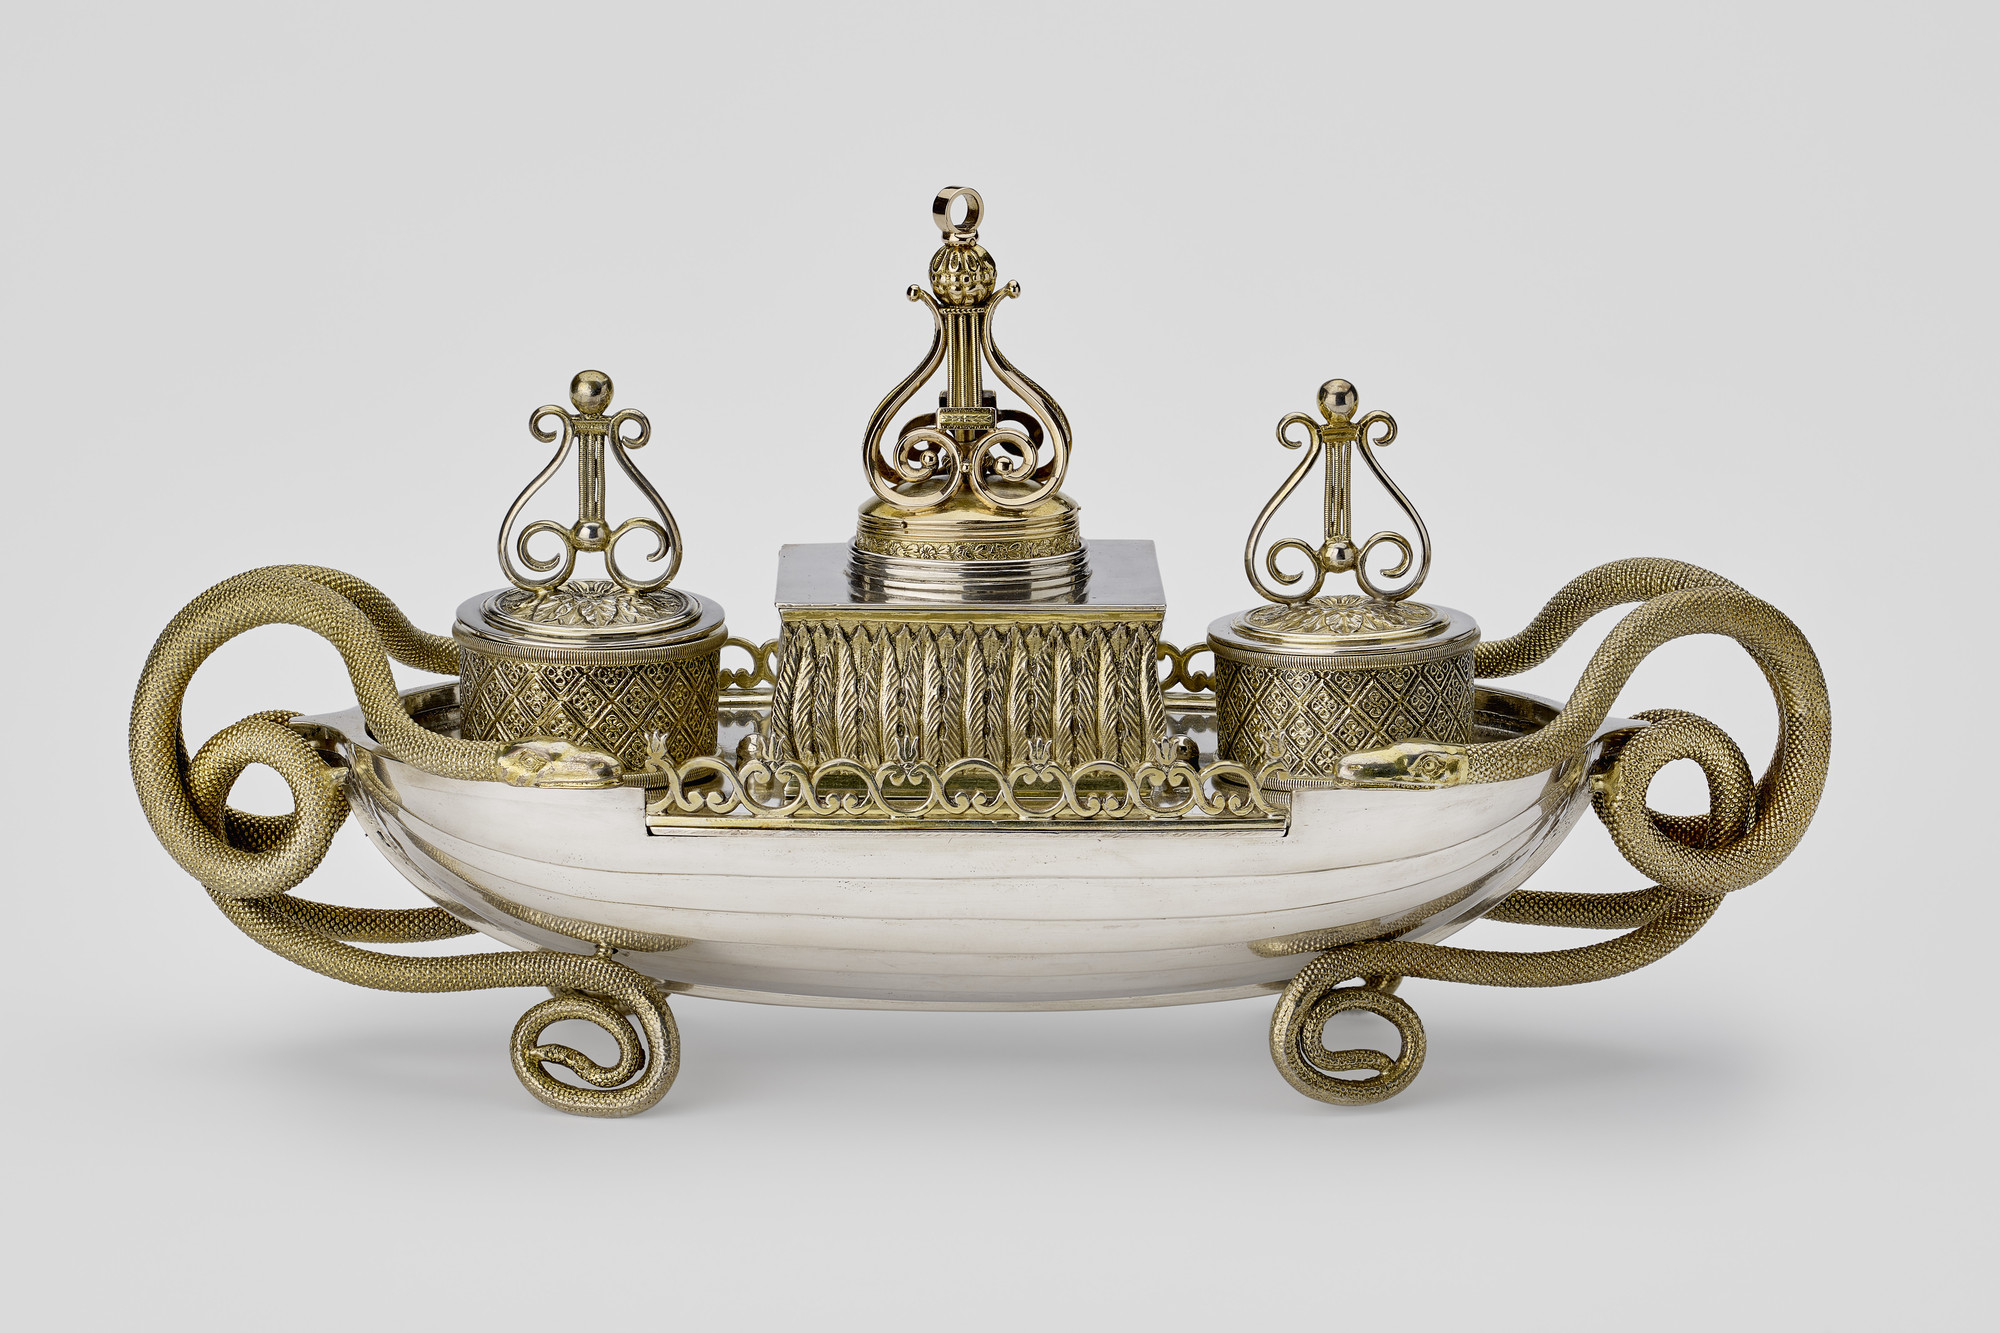 Boat shaped inkstand